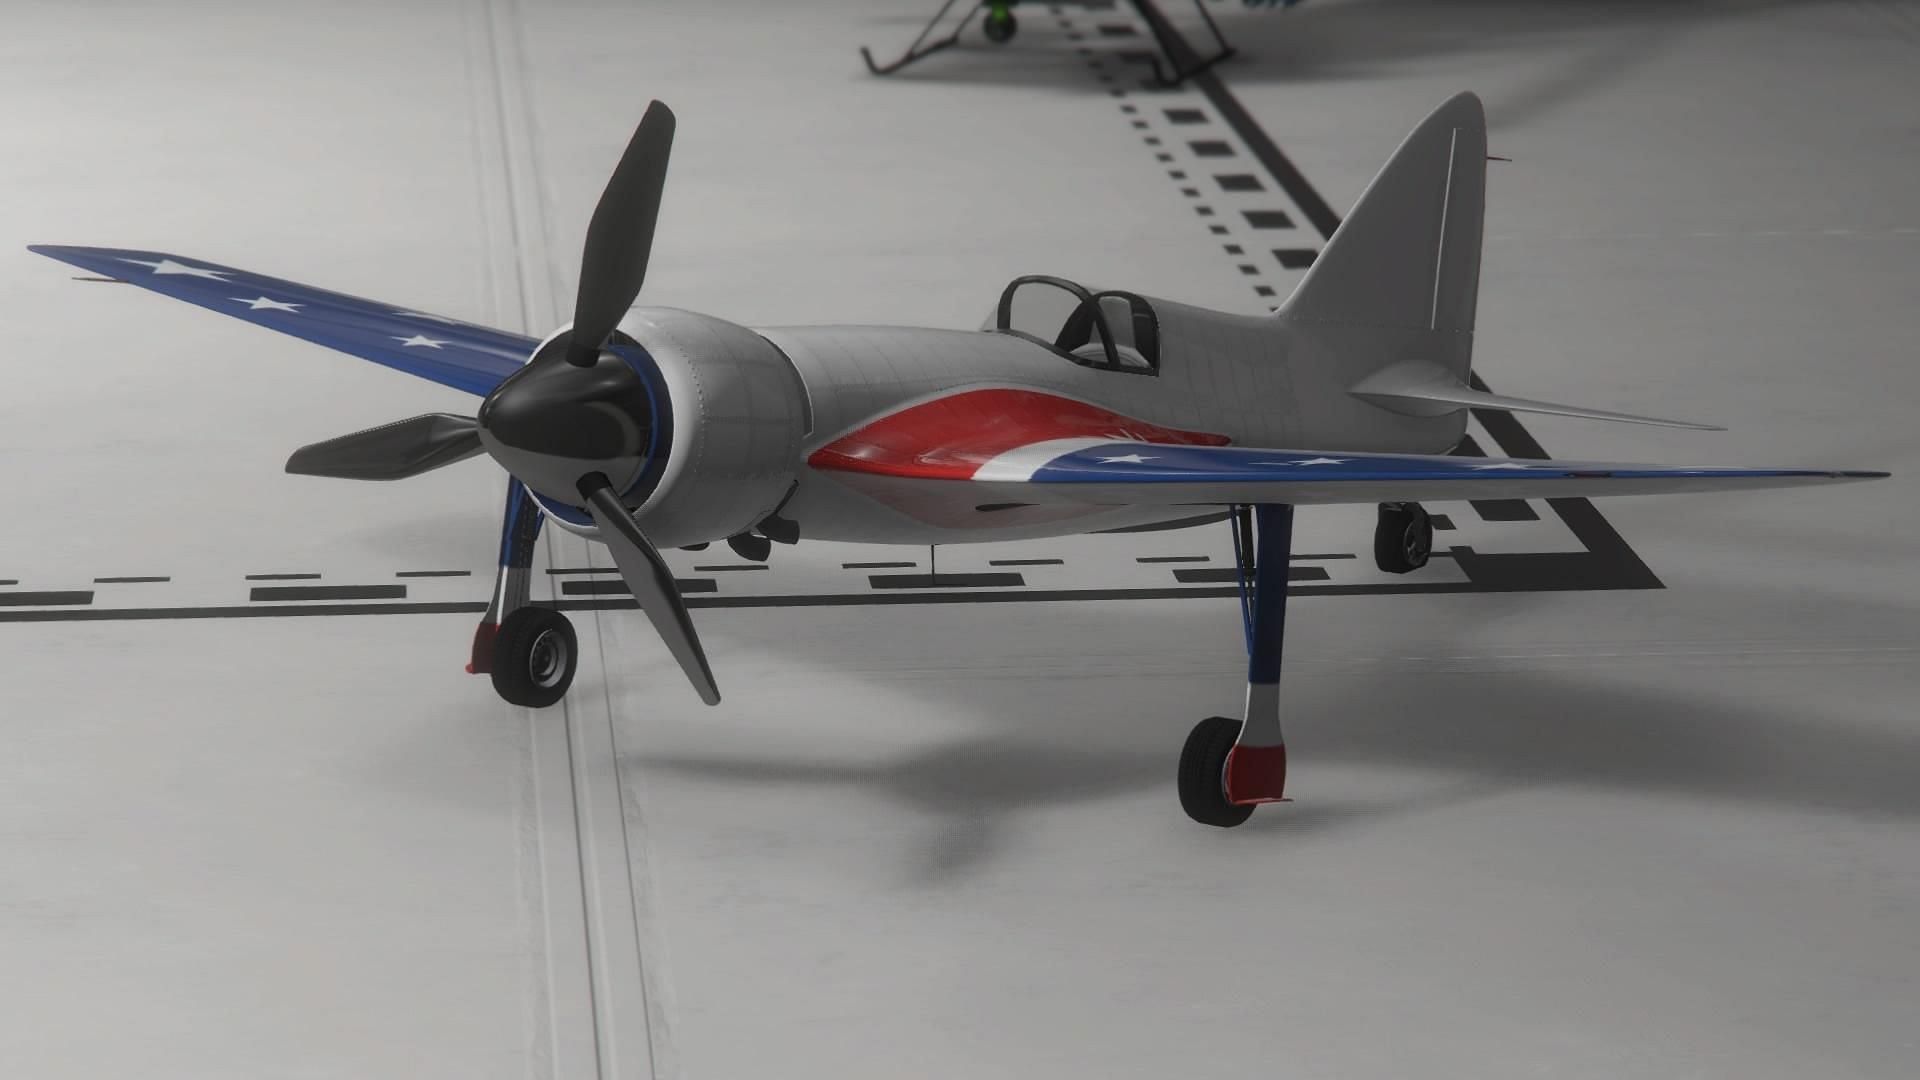 This is what the aircraft looks like (Image via GTA Base)